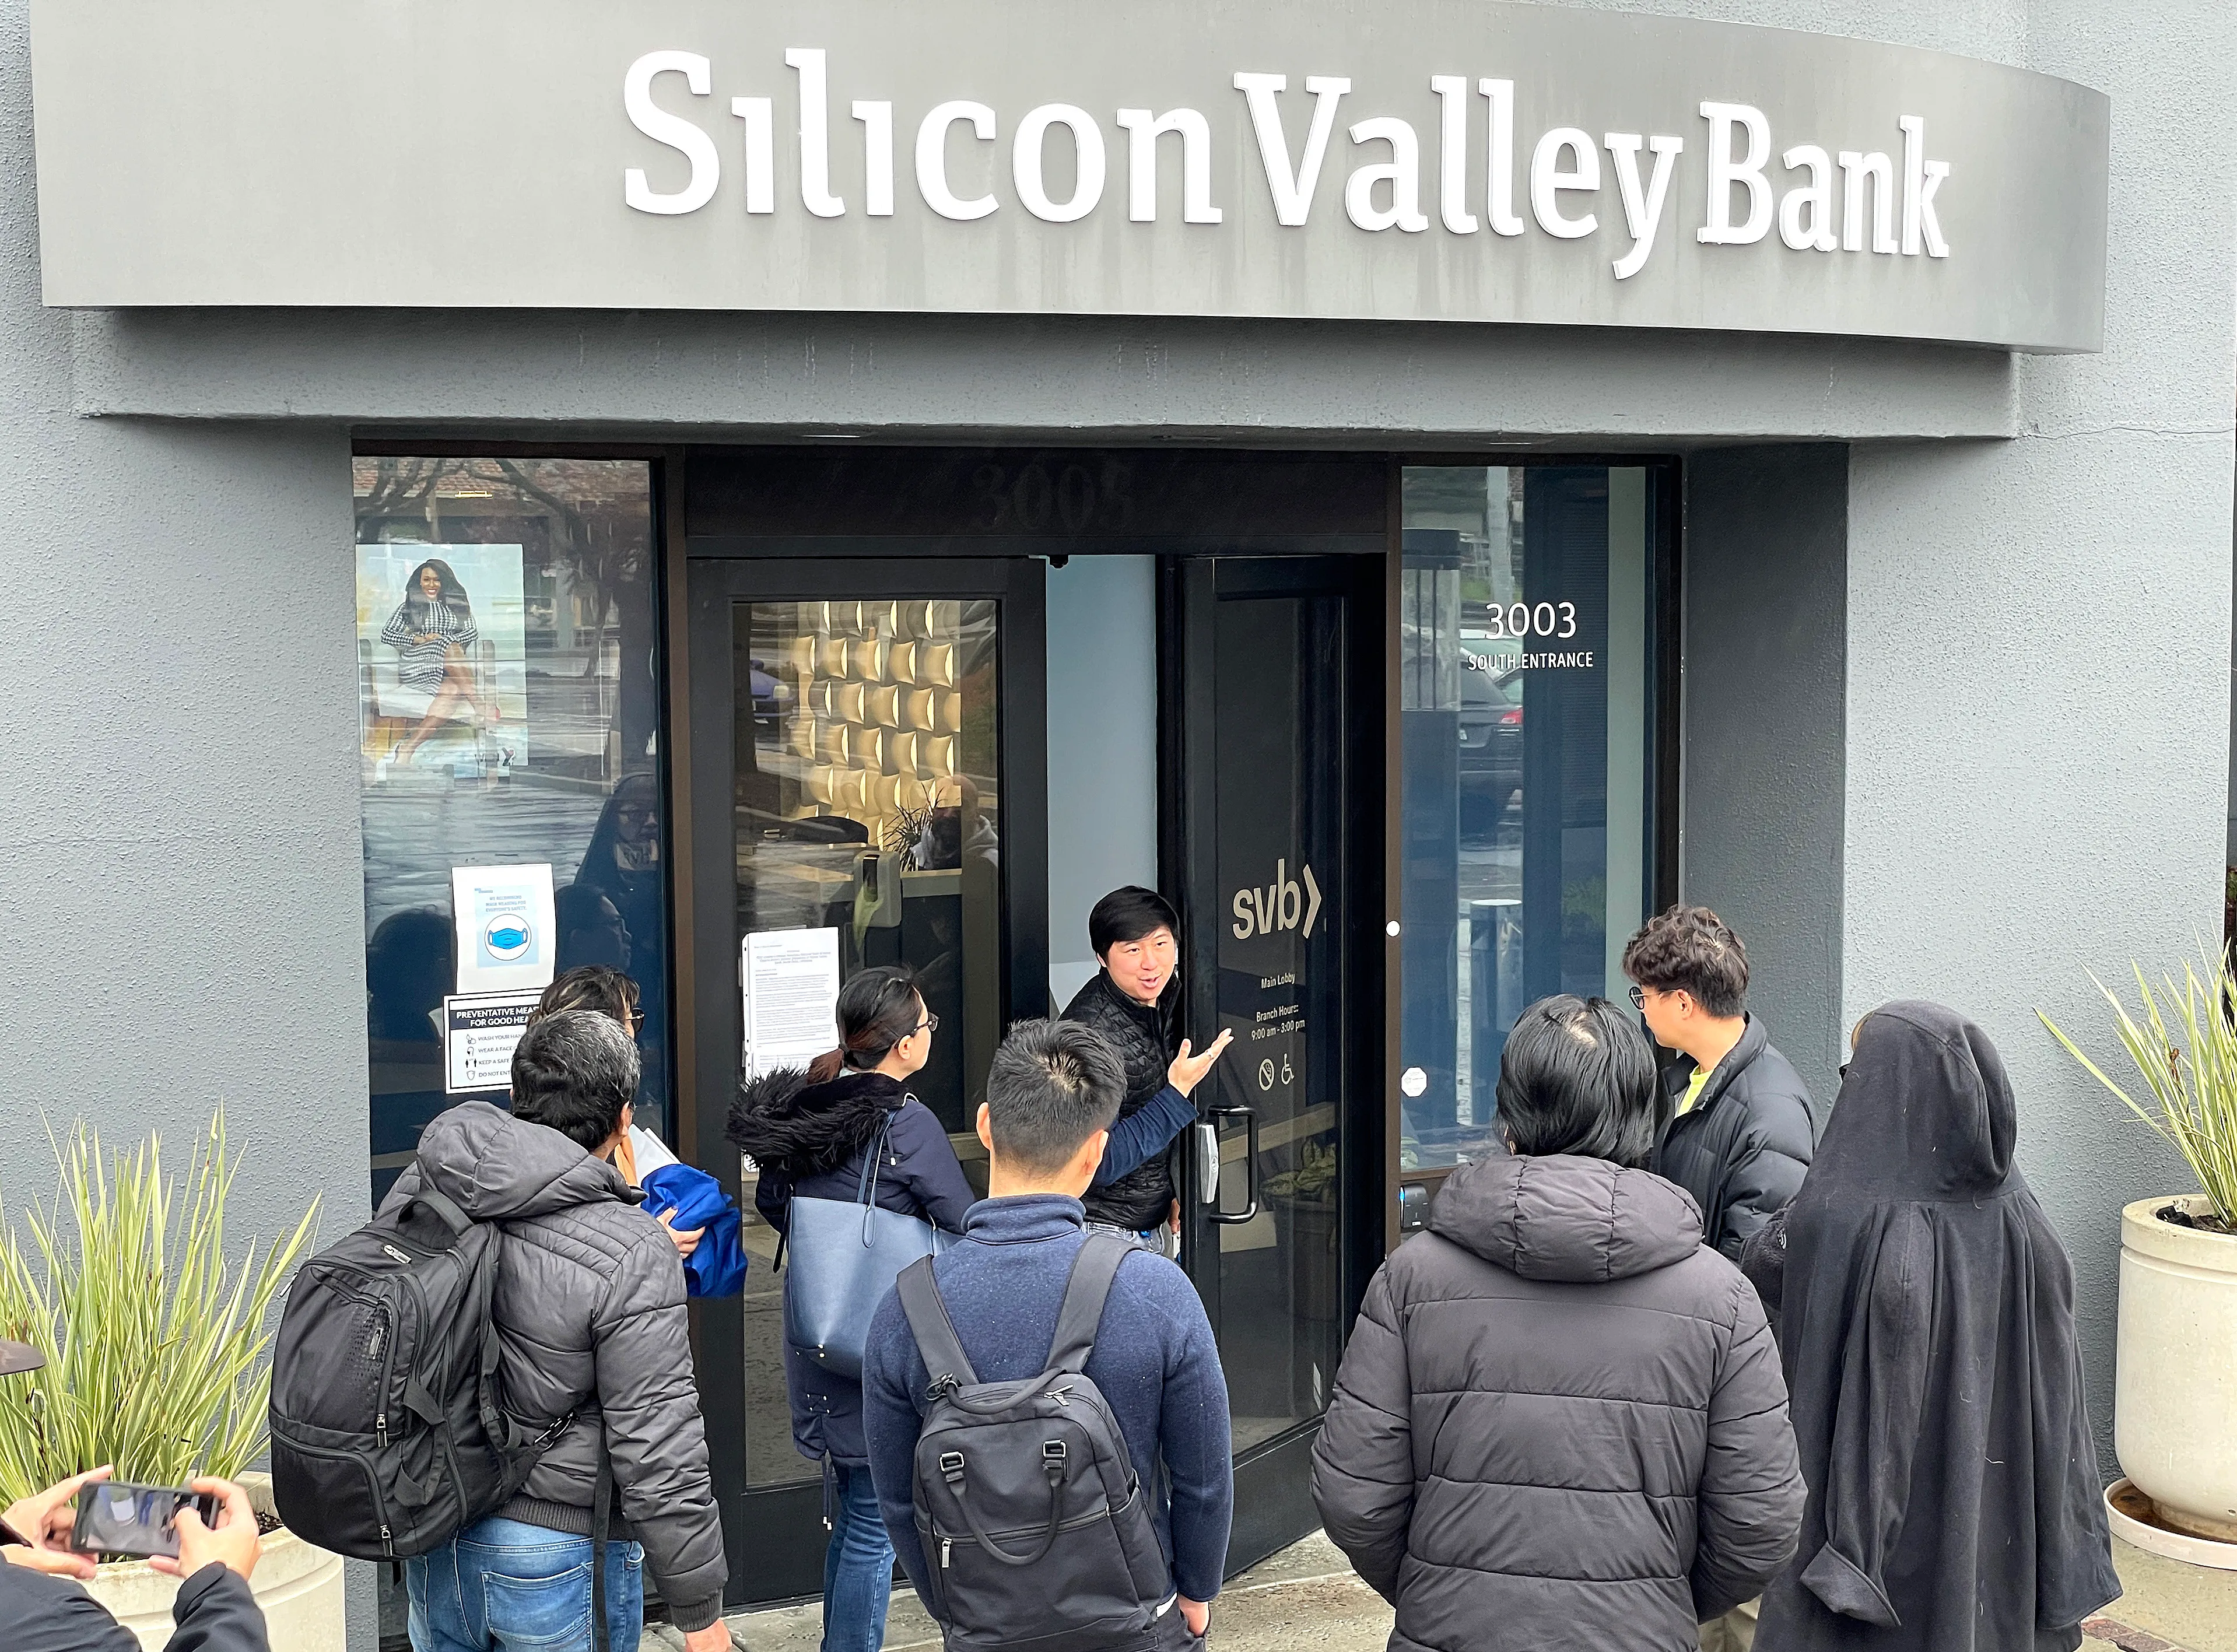 Silicon Valley Bank’s (SVB) failure brings back haunting memories of the 2008 financial crisis